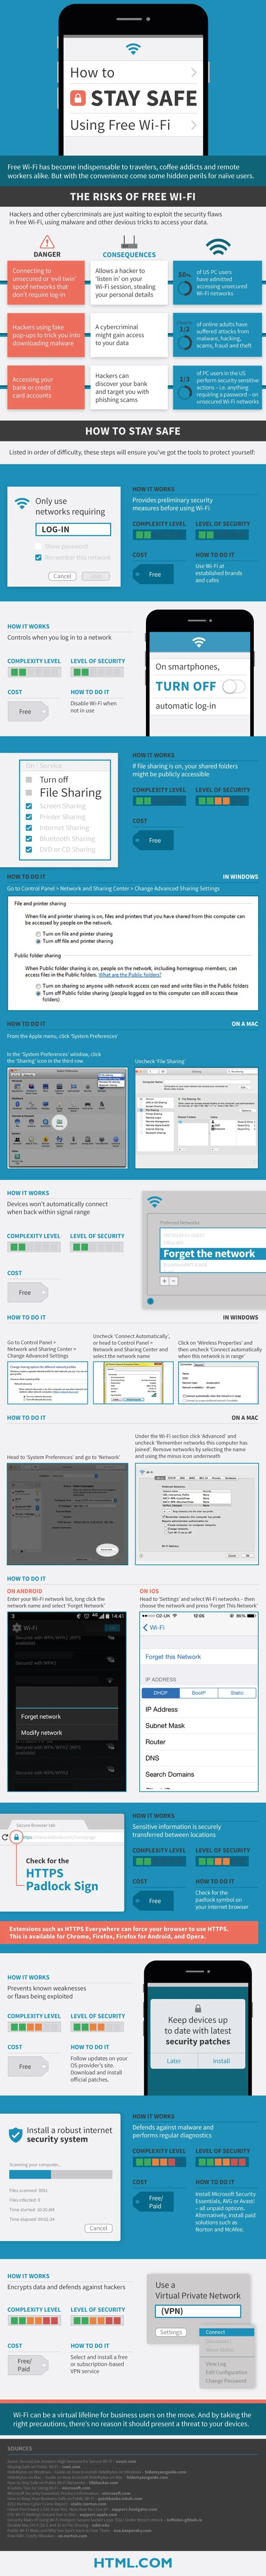 How to Stay Safe Using Free Wi-Fi - #infographic